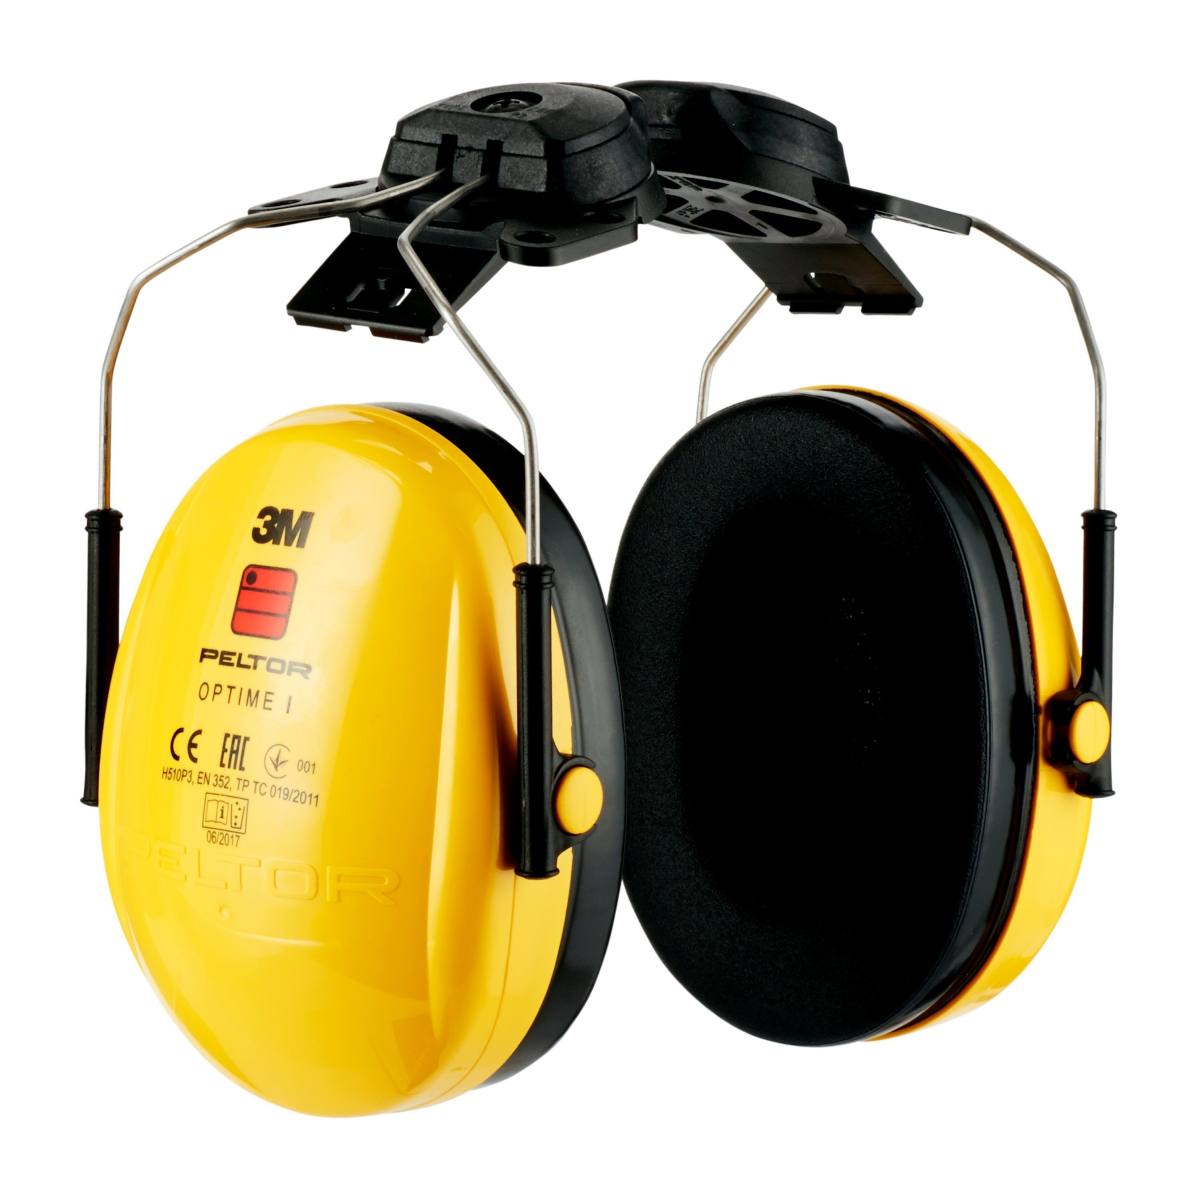 3M PELTOR Optime I earmuffs, helmet attachment, with helmet adapter, H510P3 (87 to 98 dB)